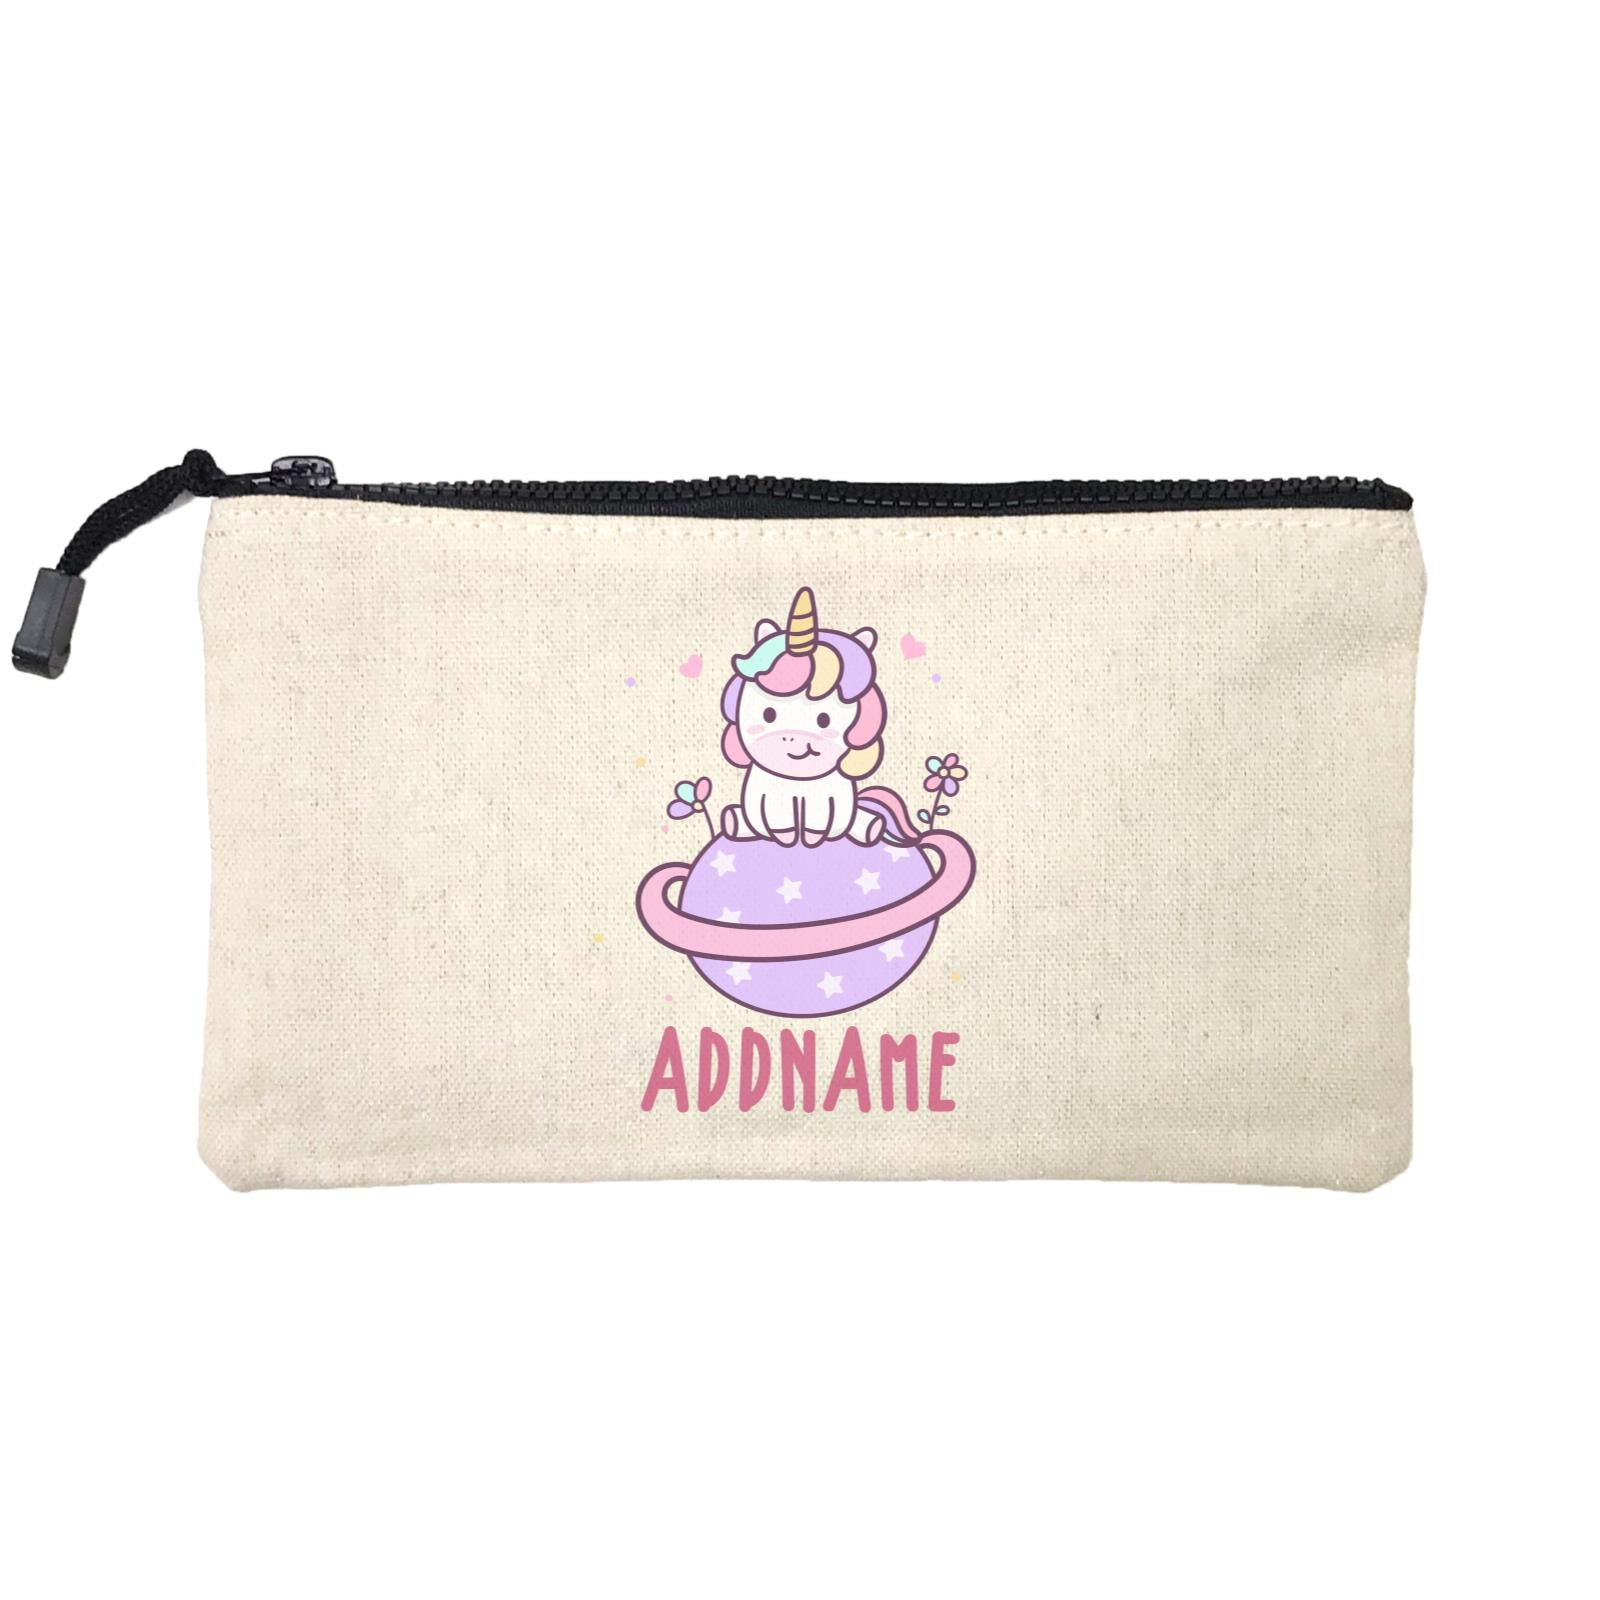 Unicorn And Princess Series Pastel Unicorn With Planet Addname Mini Accessories Stationery Pouch